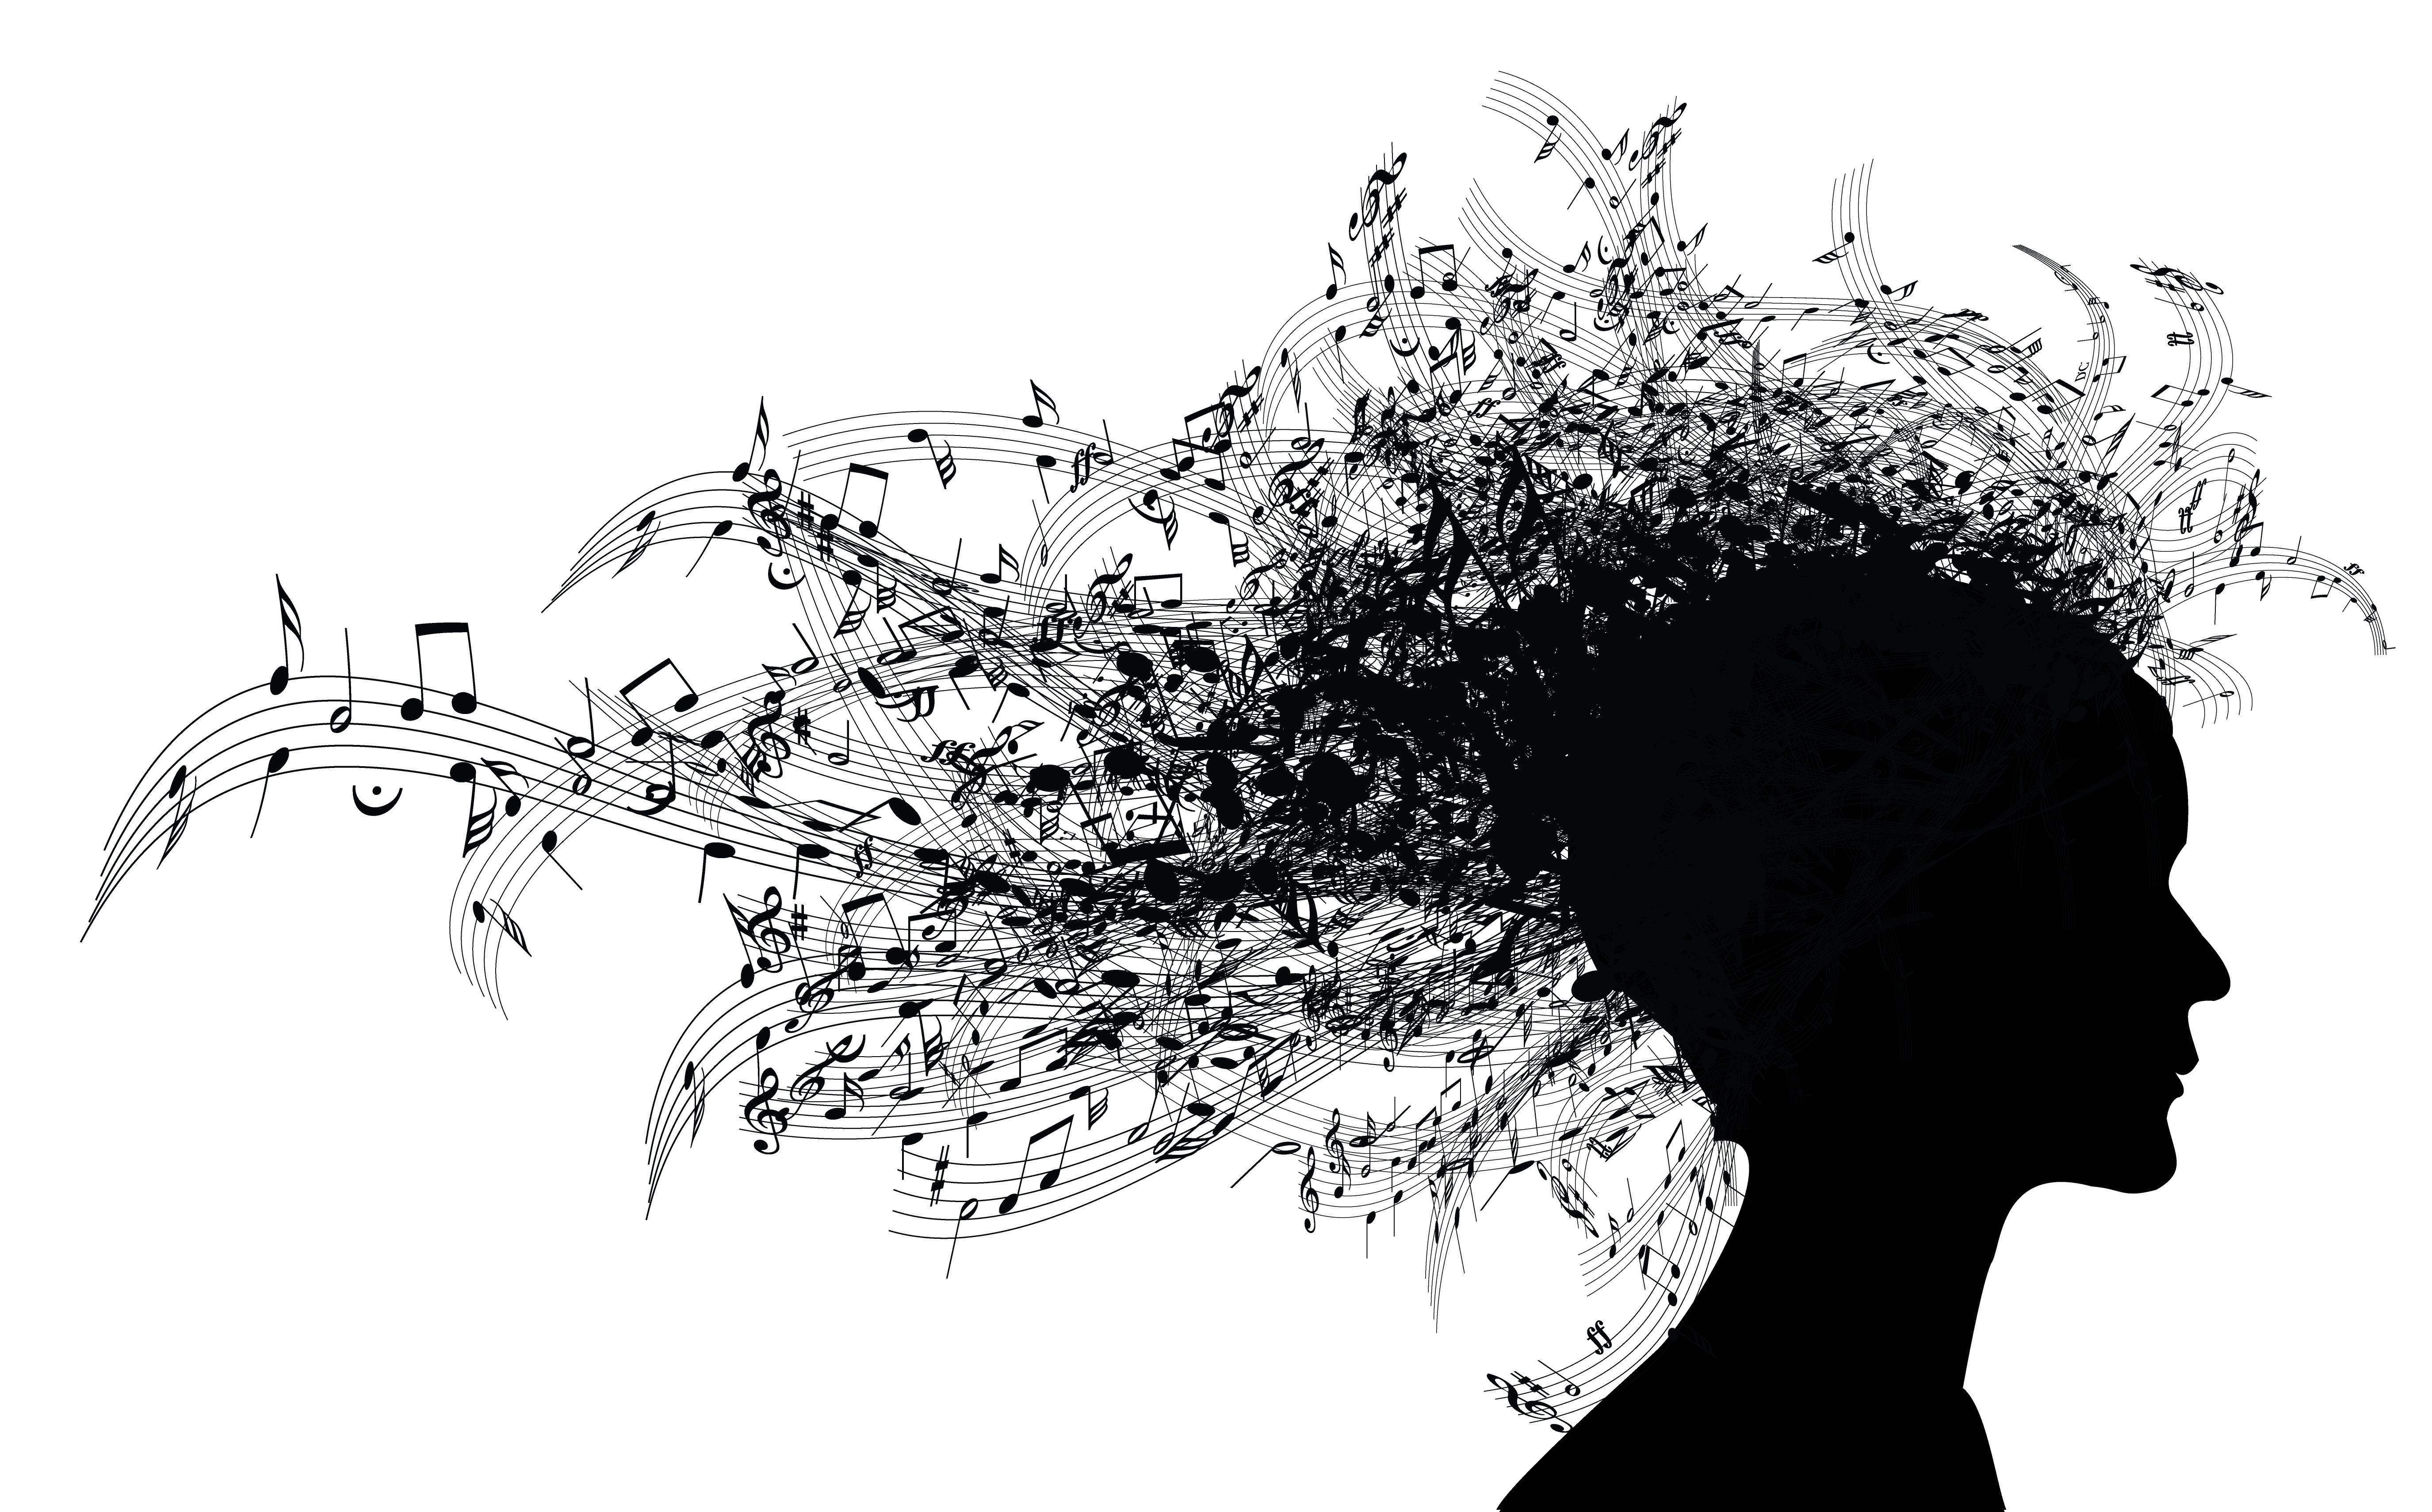 Silhouette image of woman with musical notes streaming from her head like hair.